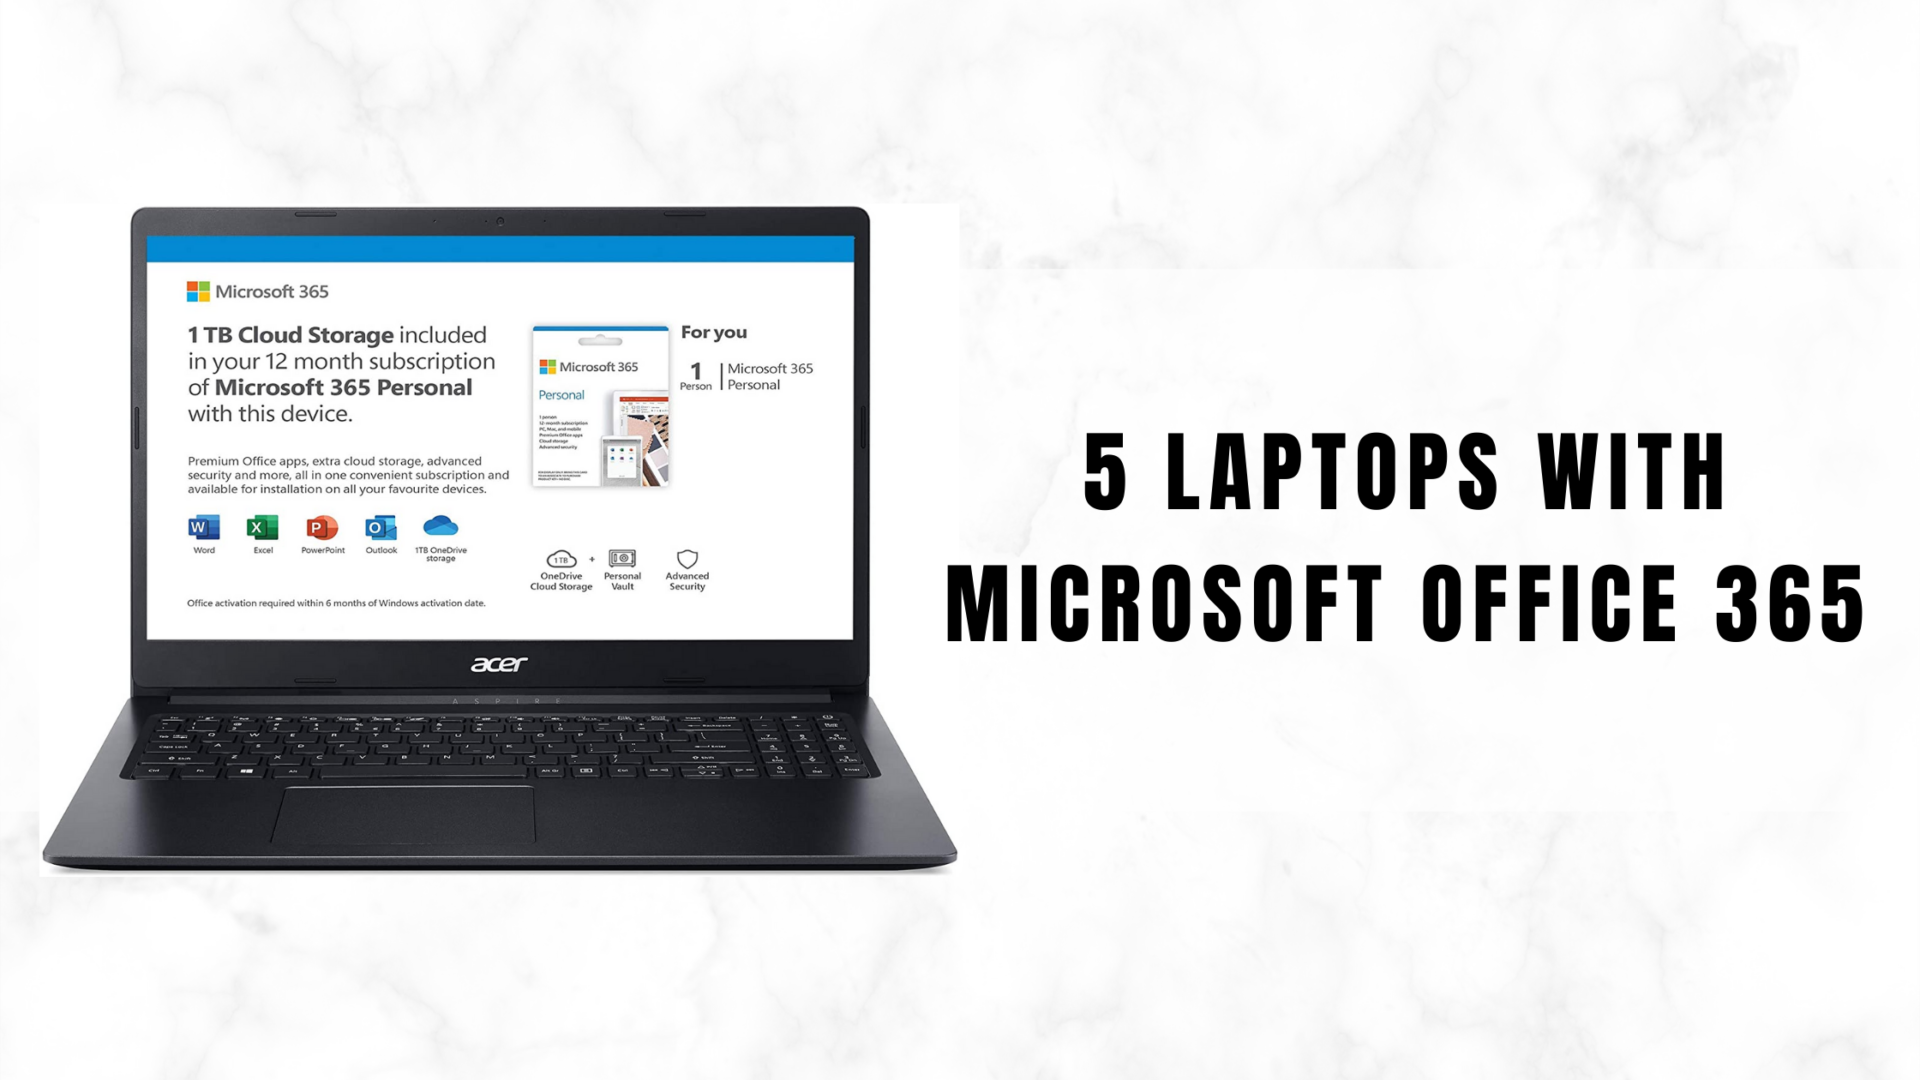 Laptop With Microsoft Office 365 (5 Cheap Laptops With MS Office)